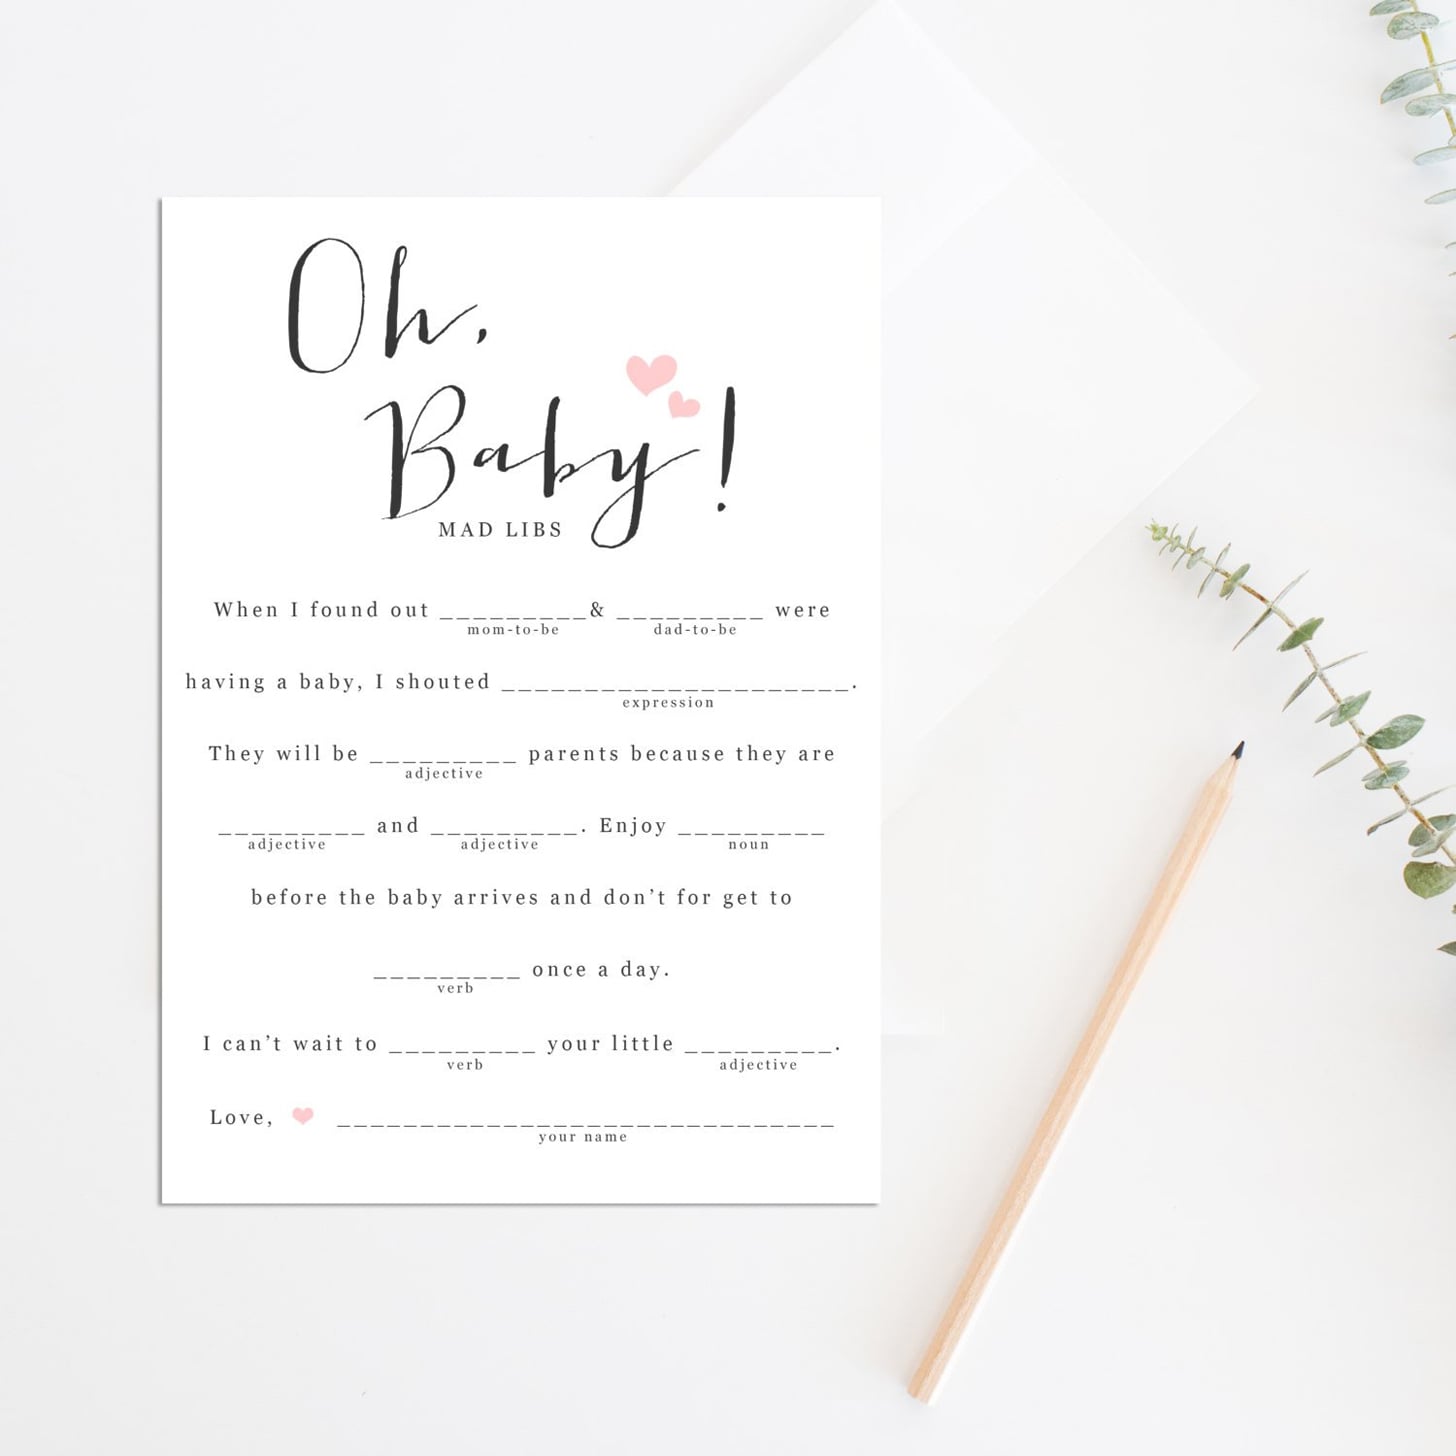 Free Printable Gift Tags for Baby Showers and New Parents